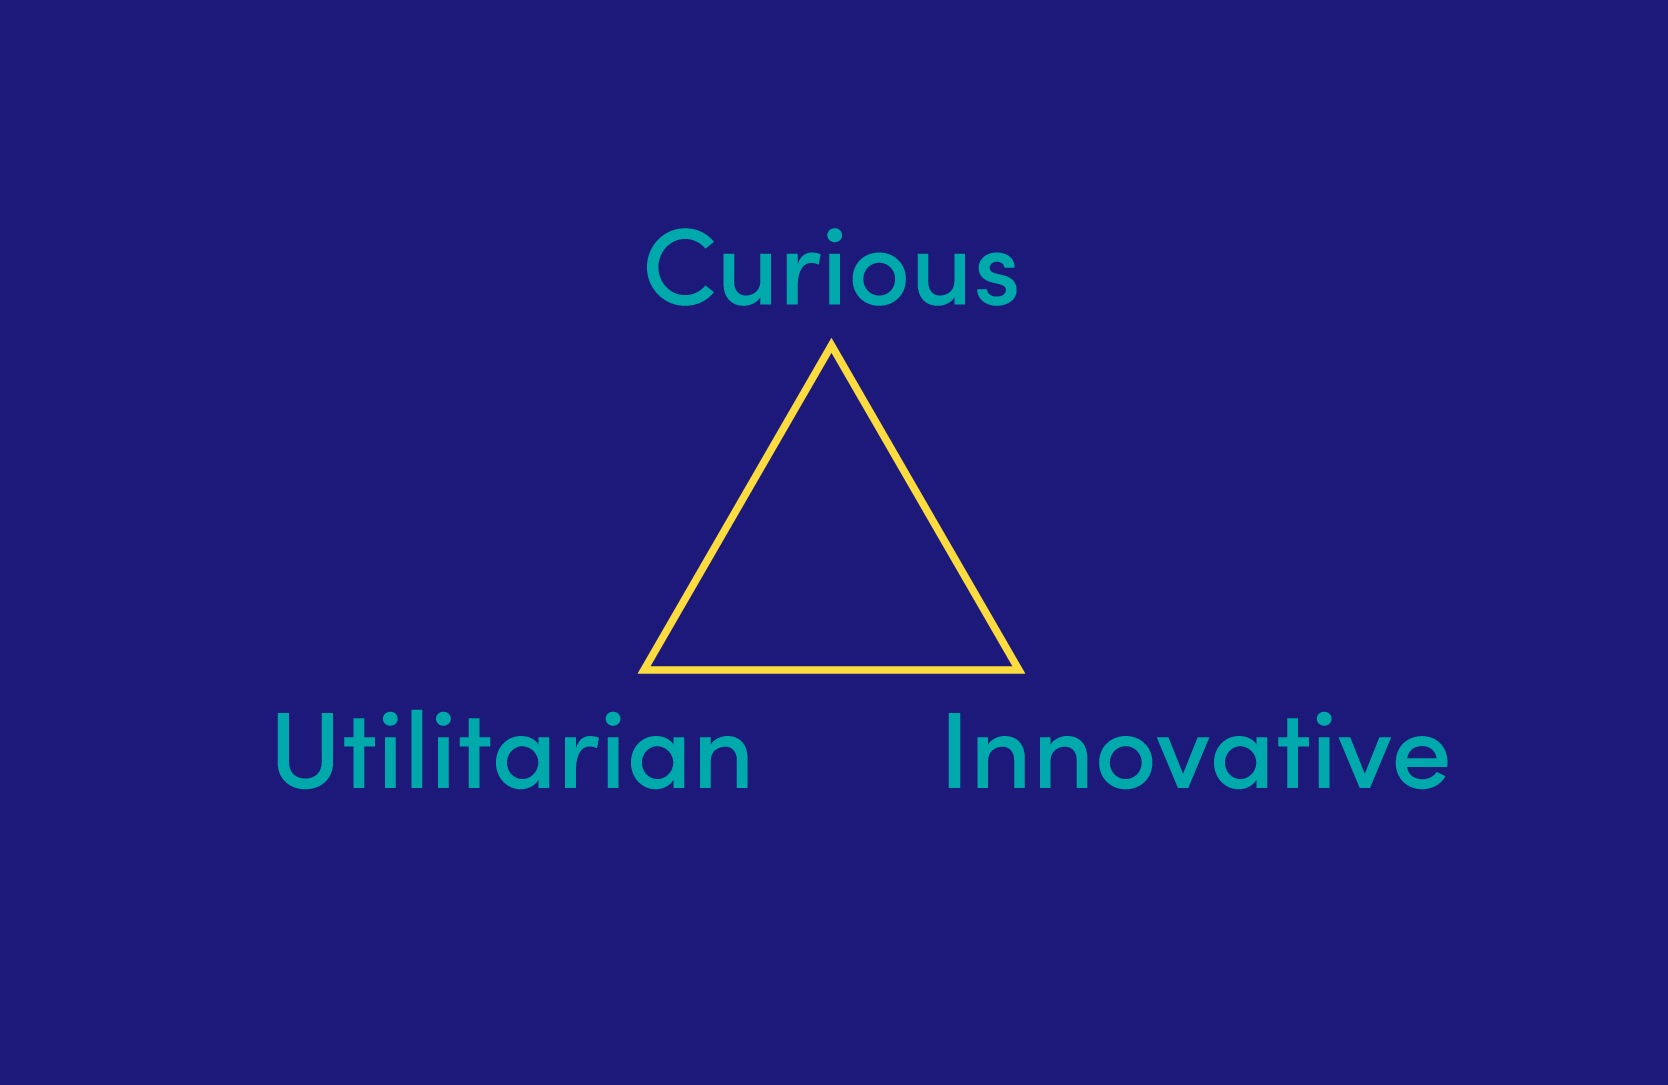 A triangle shape with the following words at each point: Curious, Utilitarian, and Innovative.